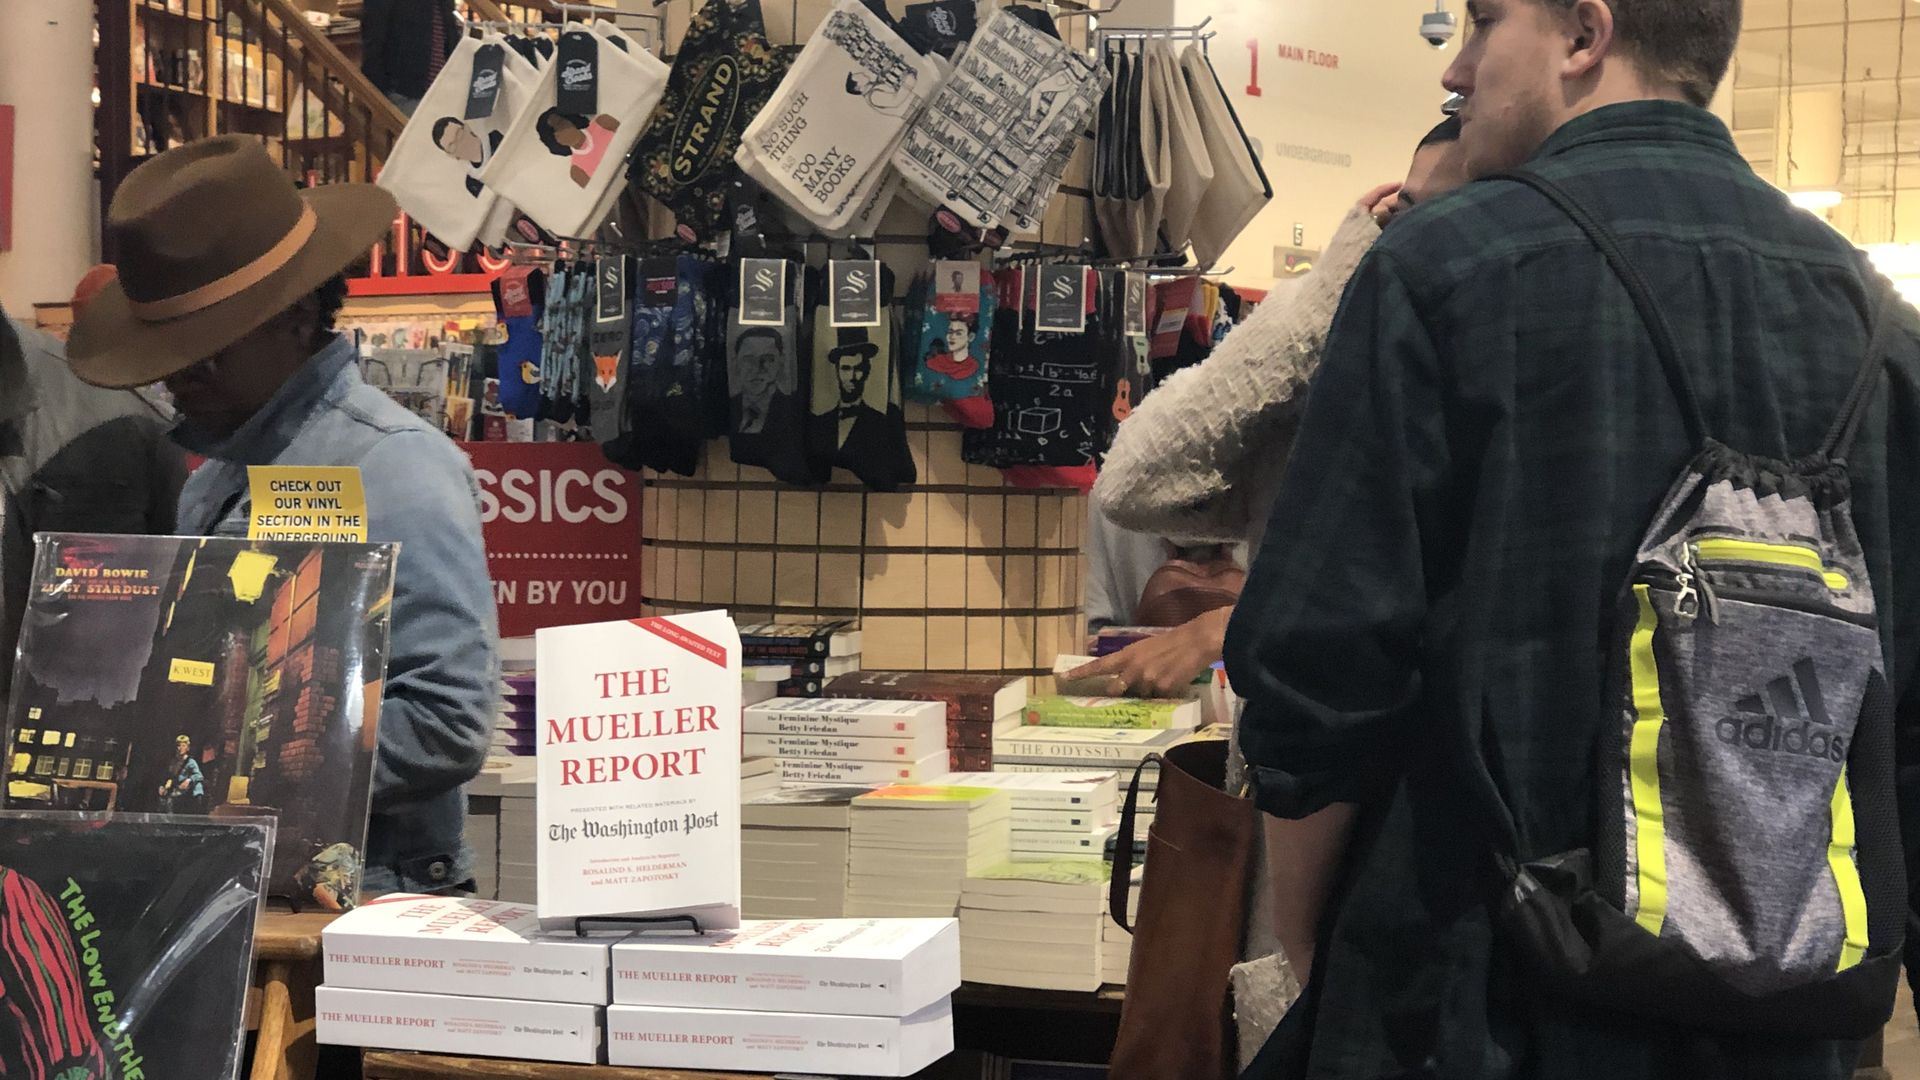 In this image, book shoppers stand around a display table with a stack of Mueller report books.